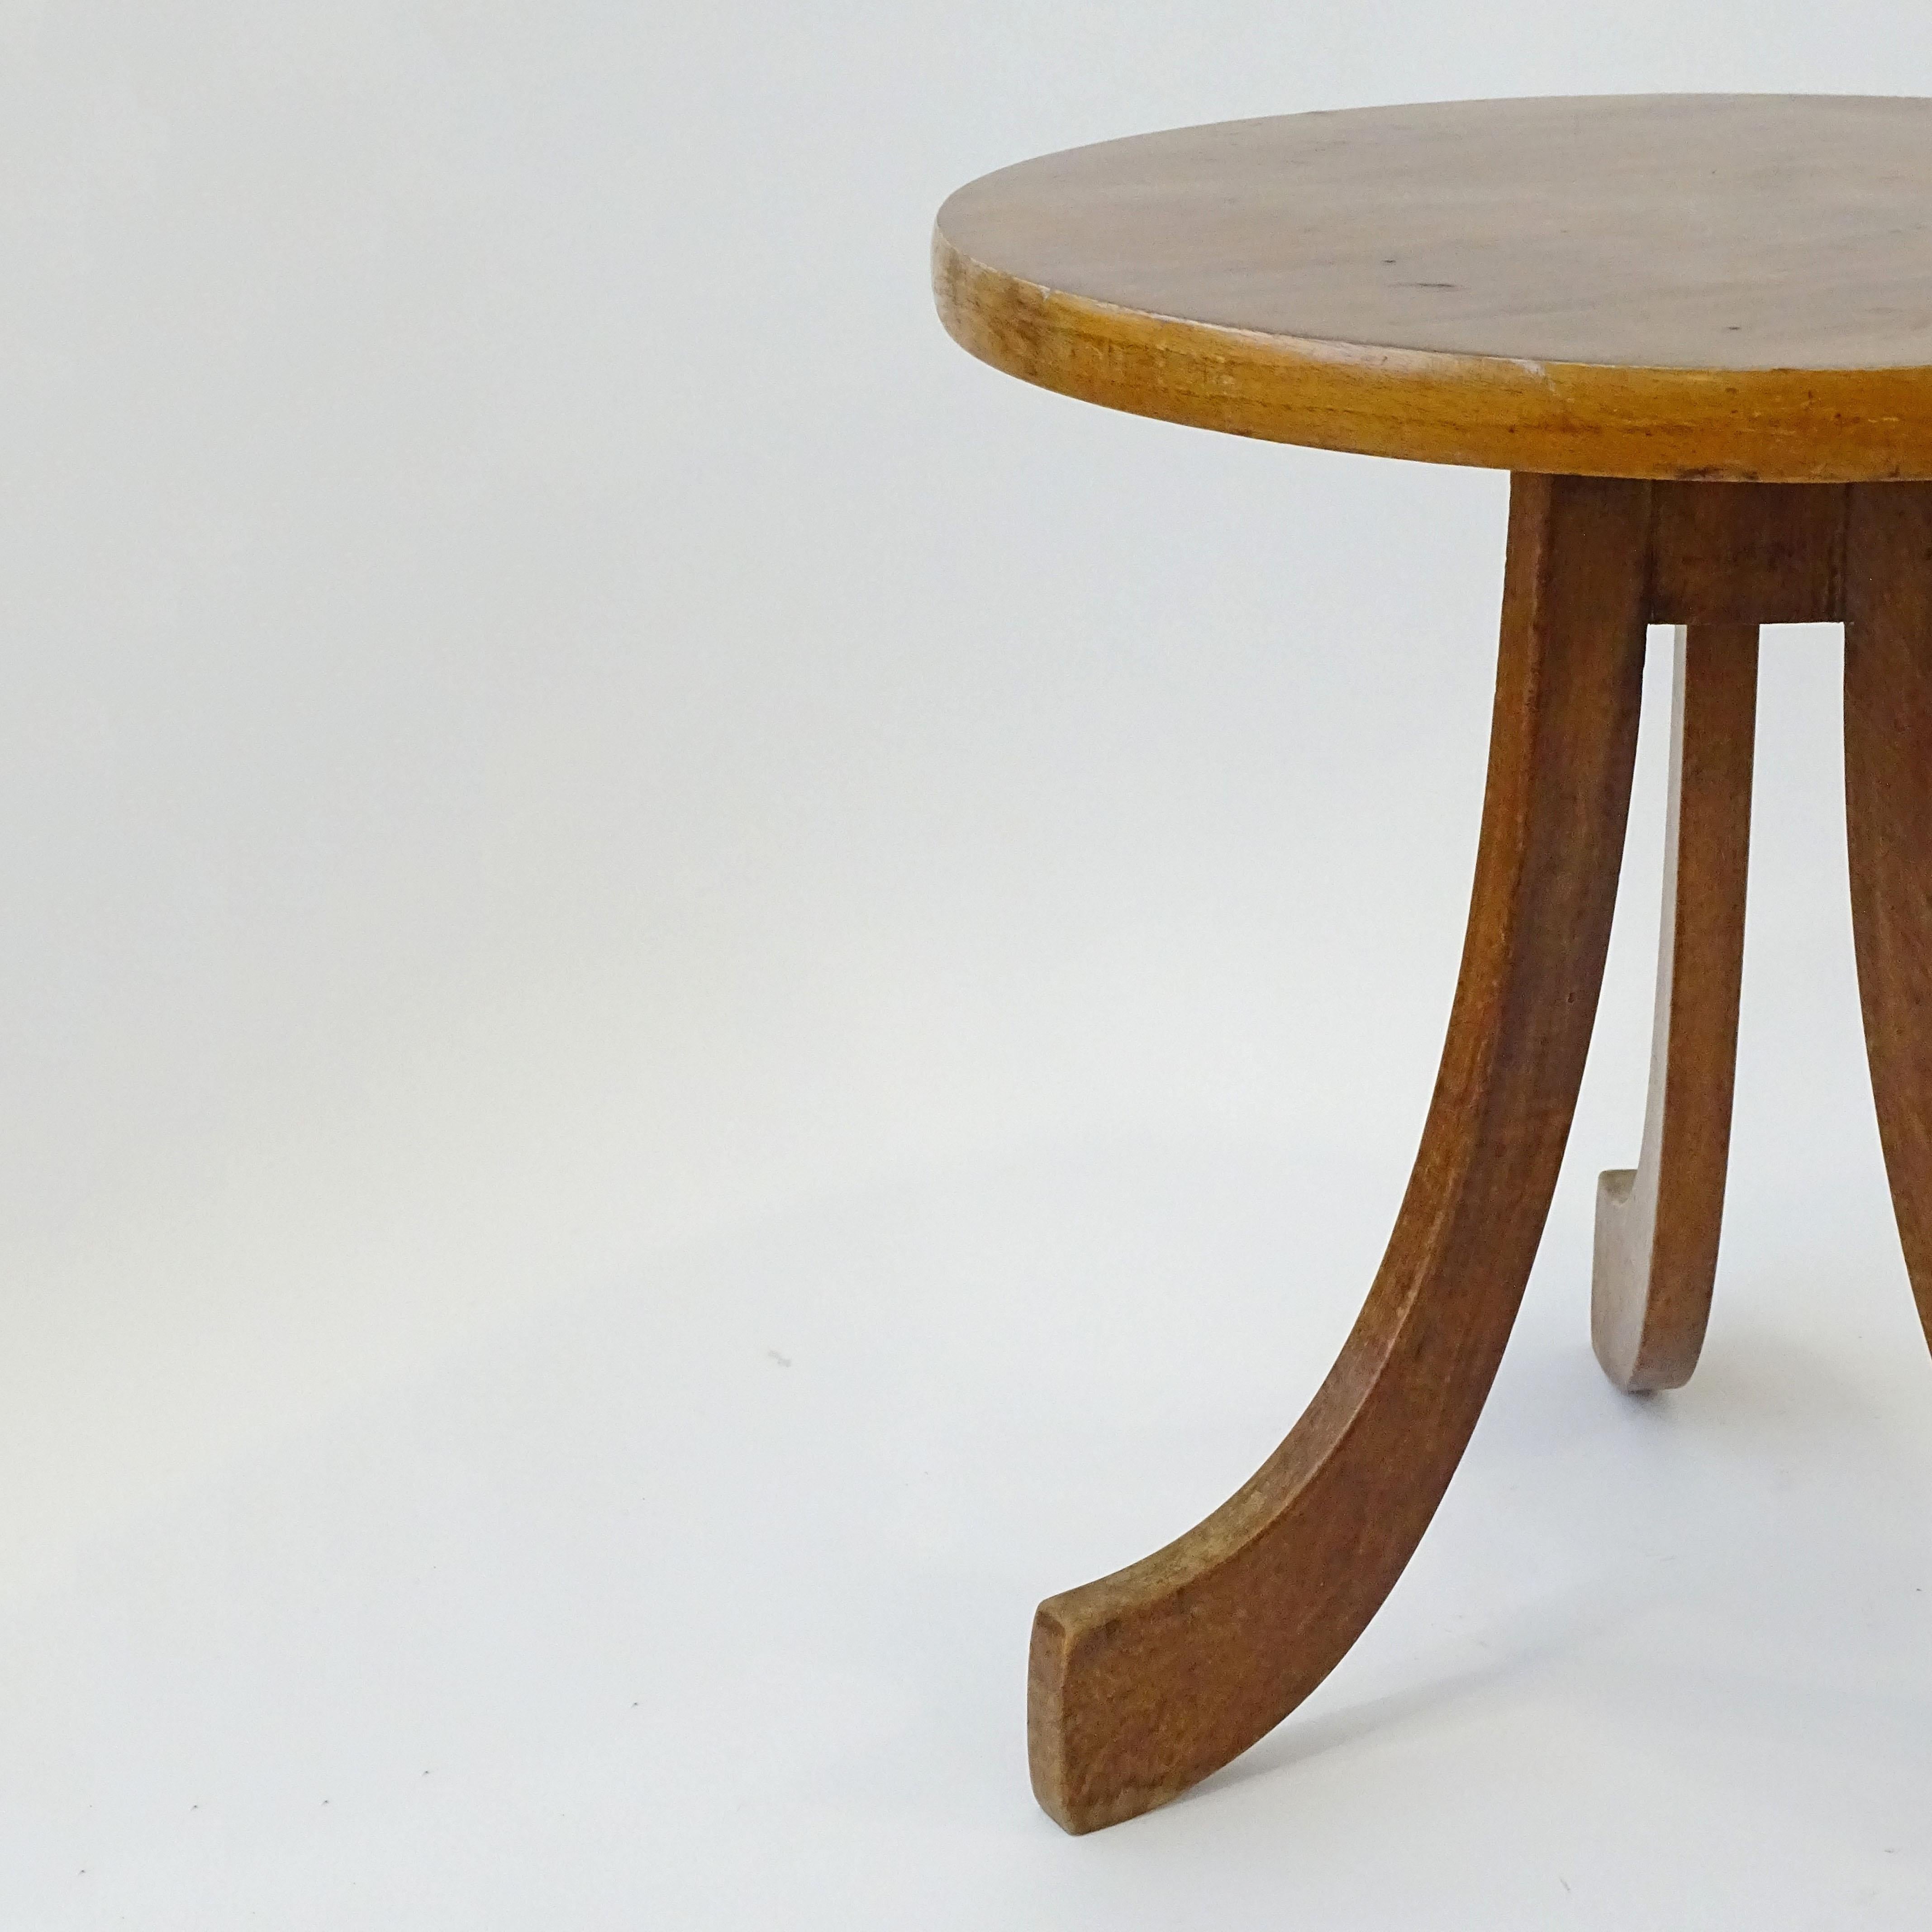 Mid-20th Century Italian 1940s Folk Art Wood Side Table with three Scrolled Legs For Sale